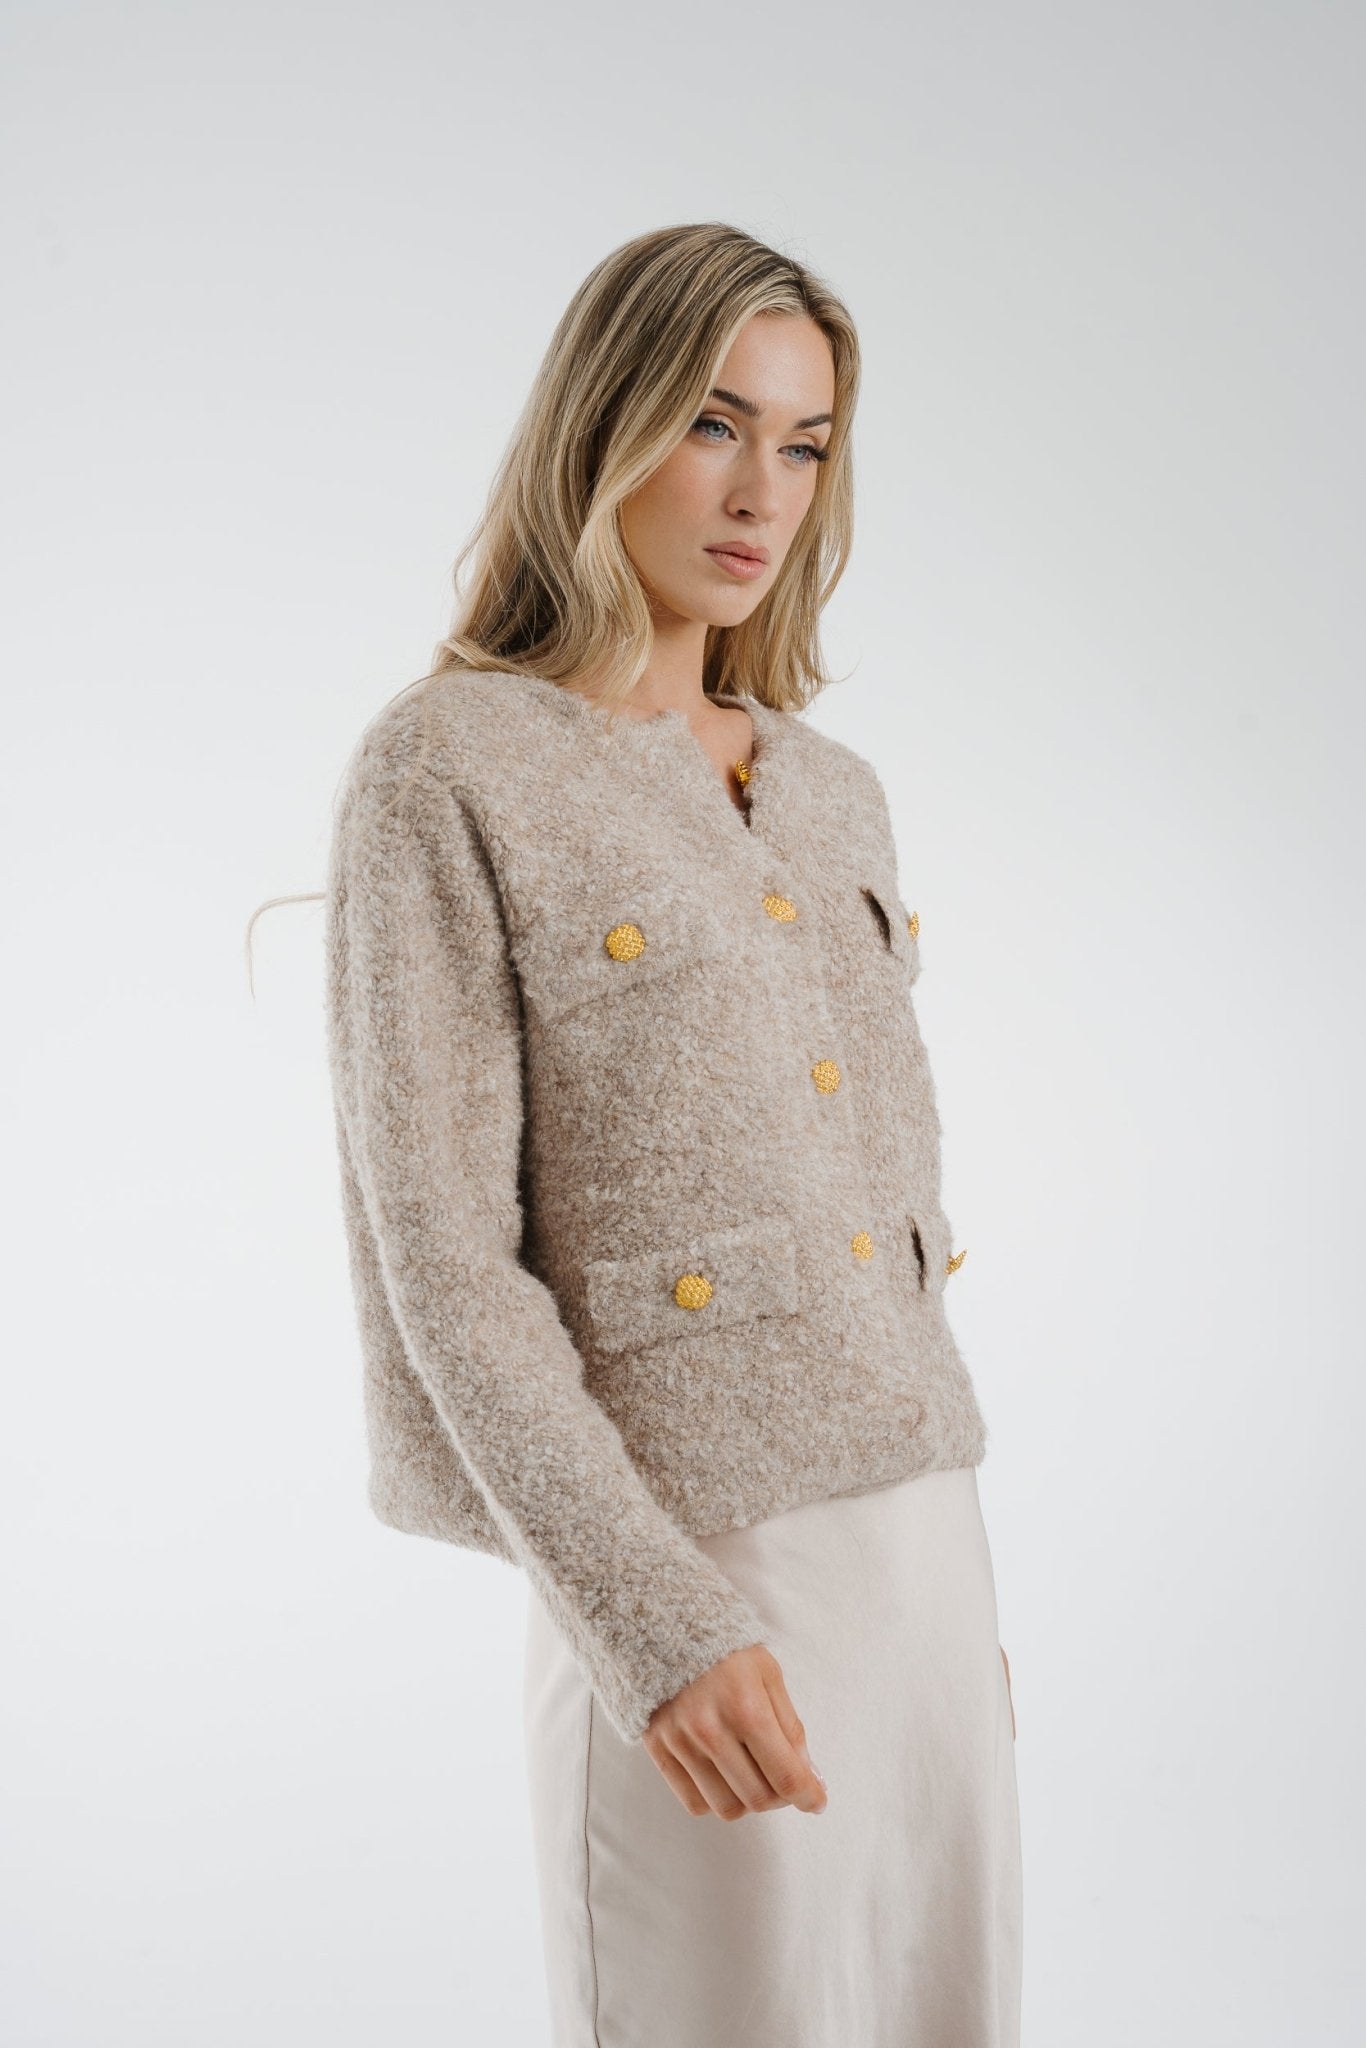 Elsa Textured Jacket In Taupe - The Walk in Wardrobe